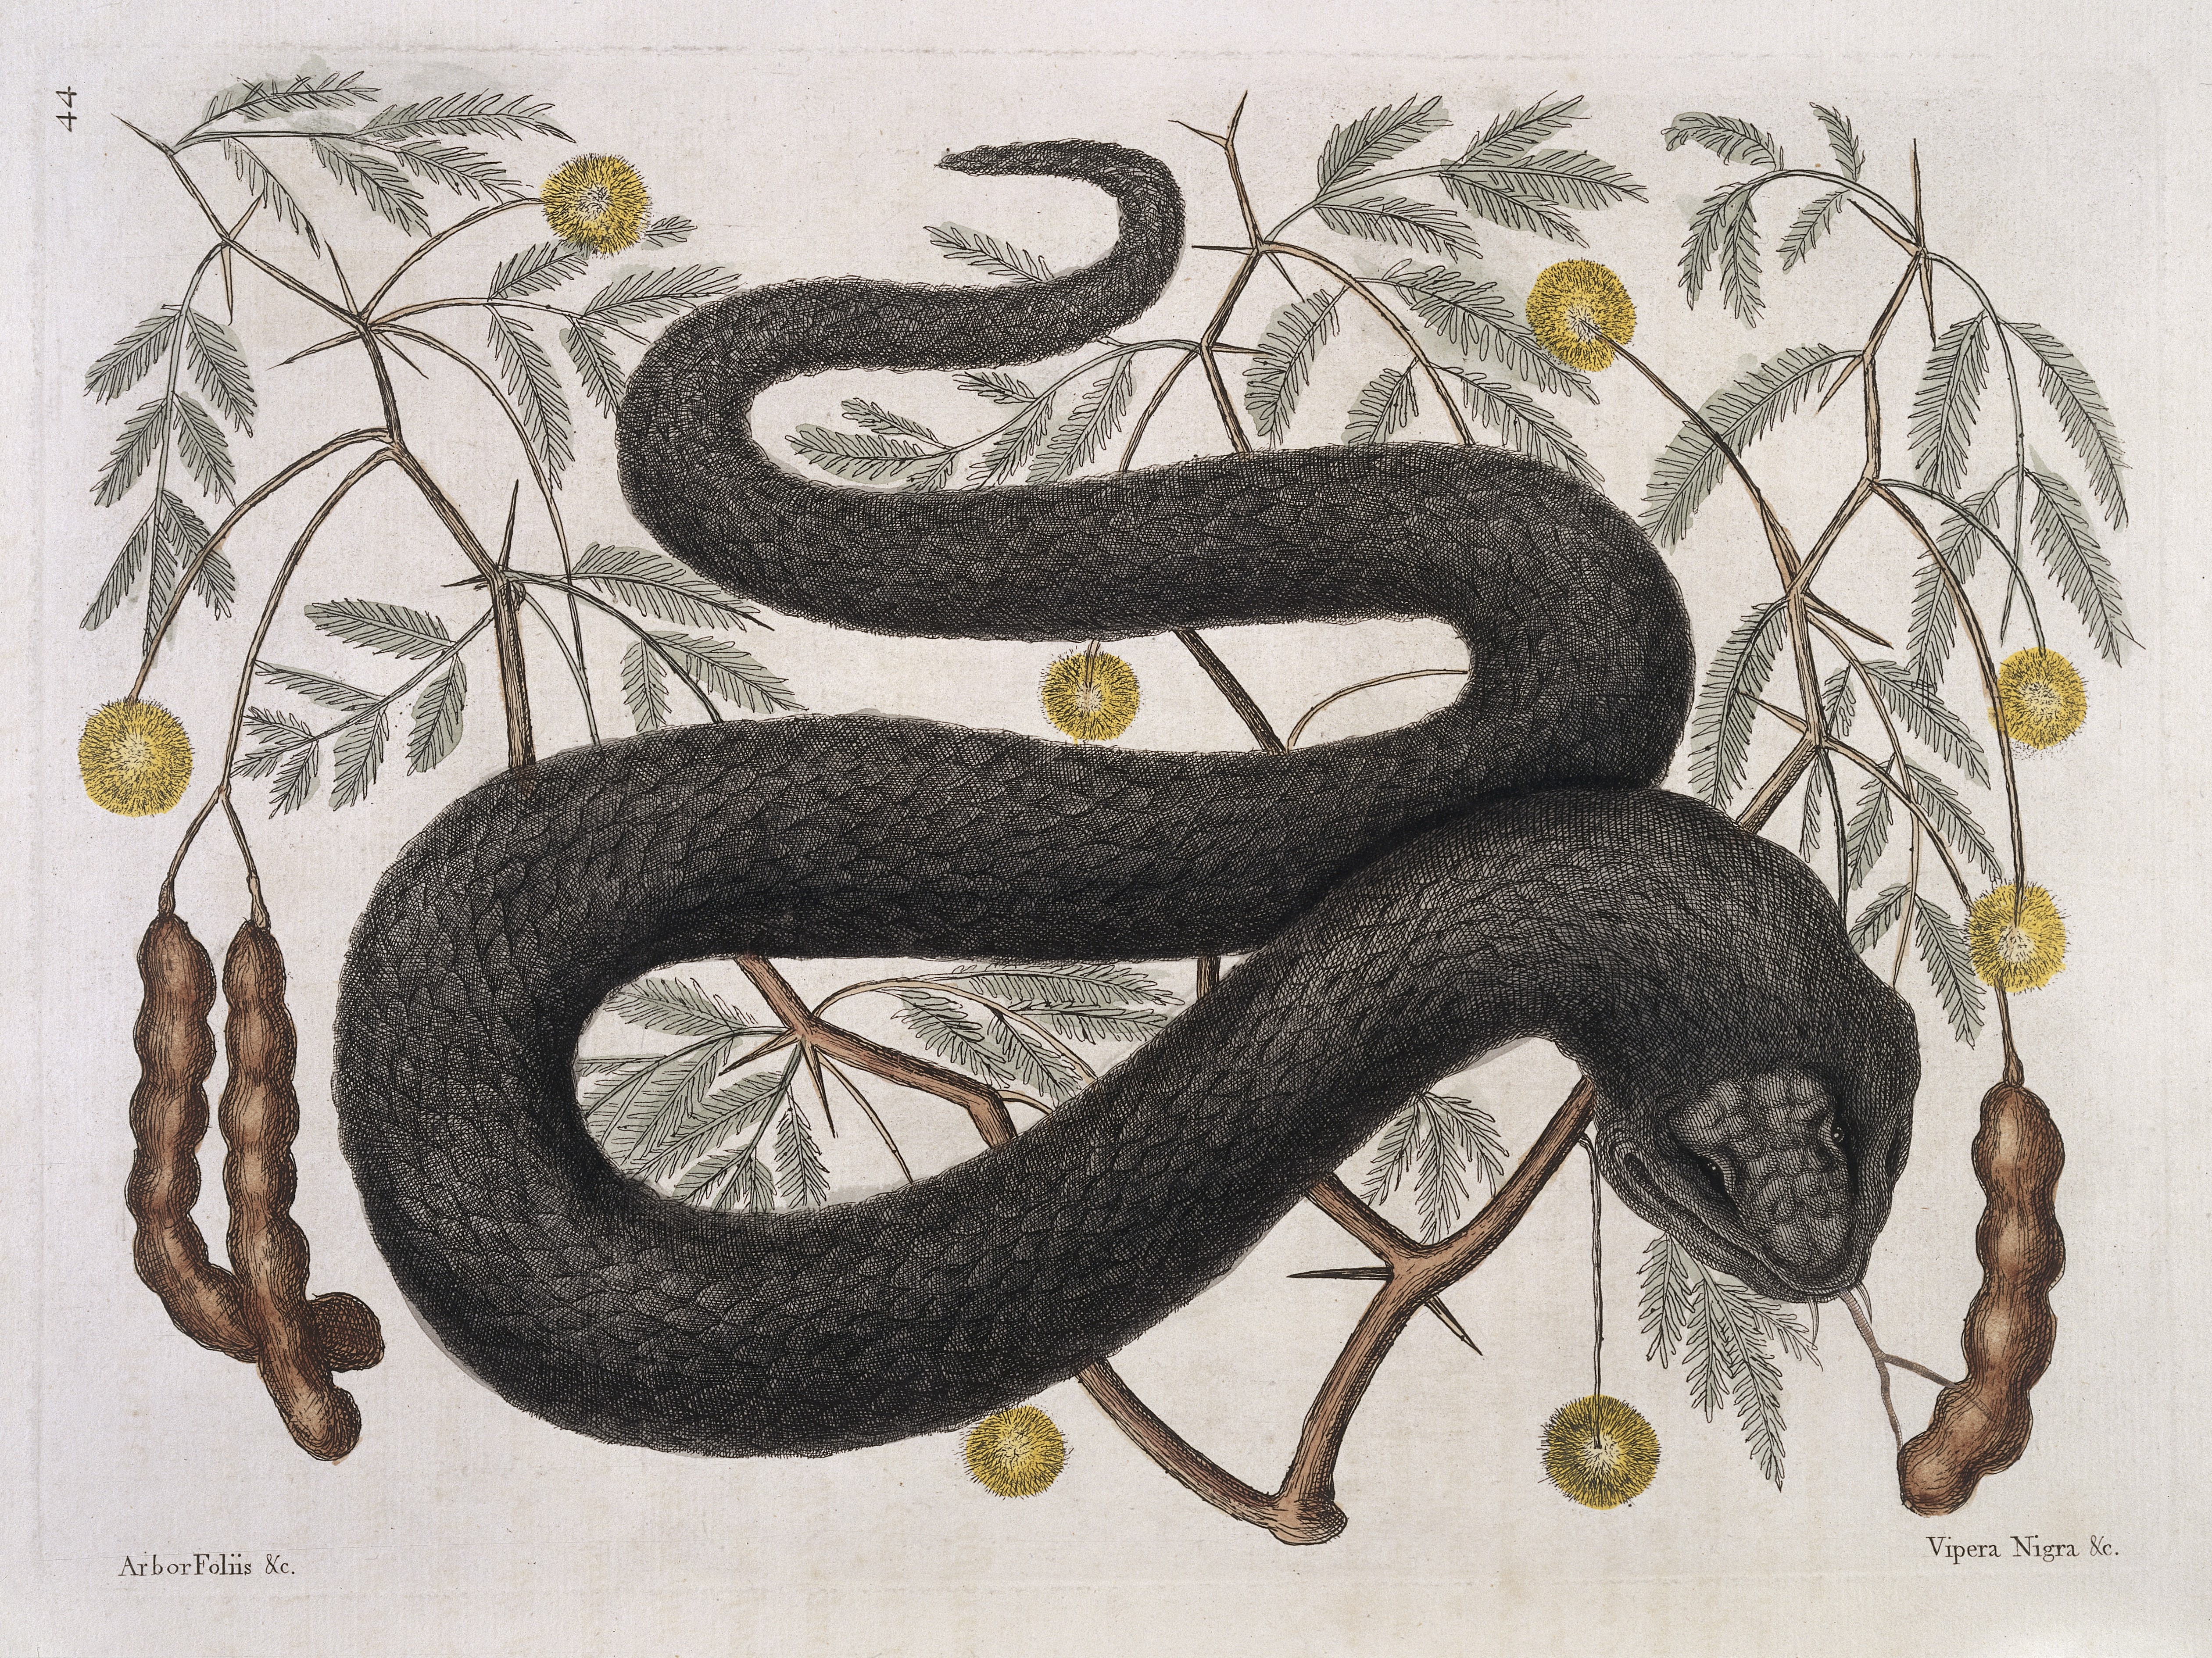 L0035353 Black viper with Arbor foliis pinnatis, 1731
Credit: Wellcome Library, London. Wellcome Images
images@wellcome.ac.uk
http://wellcomeimages.org
Illustration showing black viper (Vipera Nigra) with Arbor foliis pinnatis plant. This snake, a native of America, has a venomous bite.
Printed Reproduction
The natural history of Carolina, Florida and the Bahama Islands ...
Mark Catesby
Published: 1731-1743

Copyrighted work available under Creative Commons Attribution only licence CC BY 4.0 http://creativecommons.org/licenses/by/4.0/